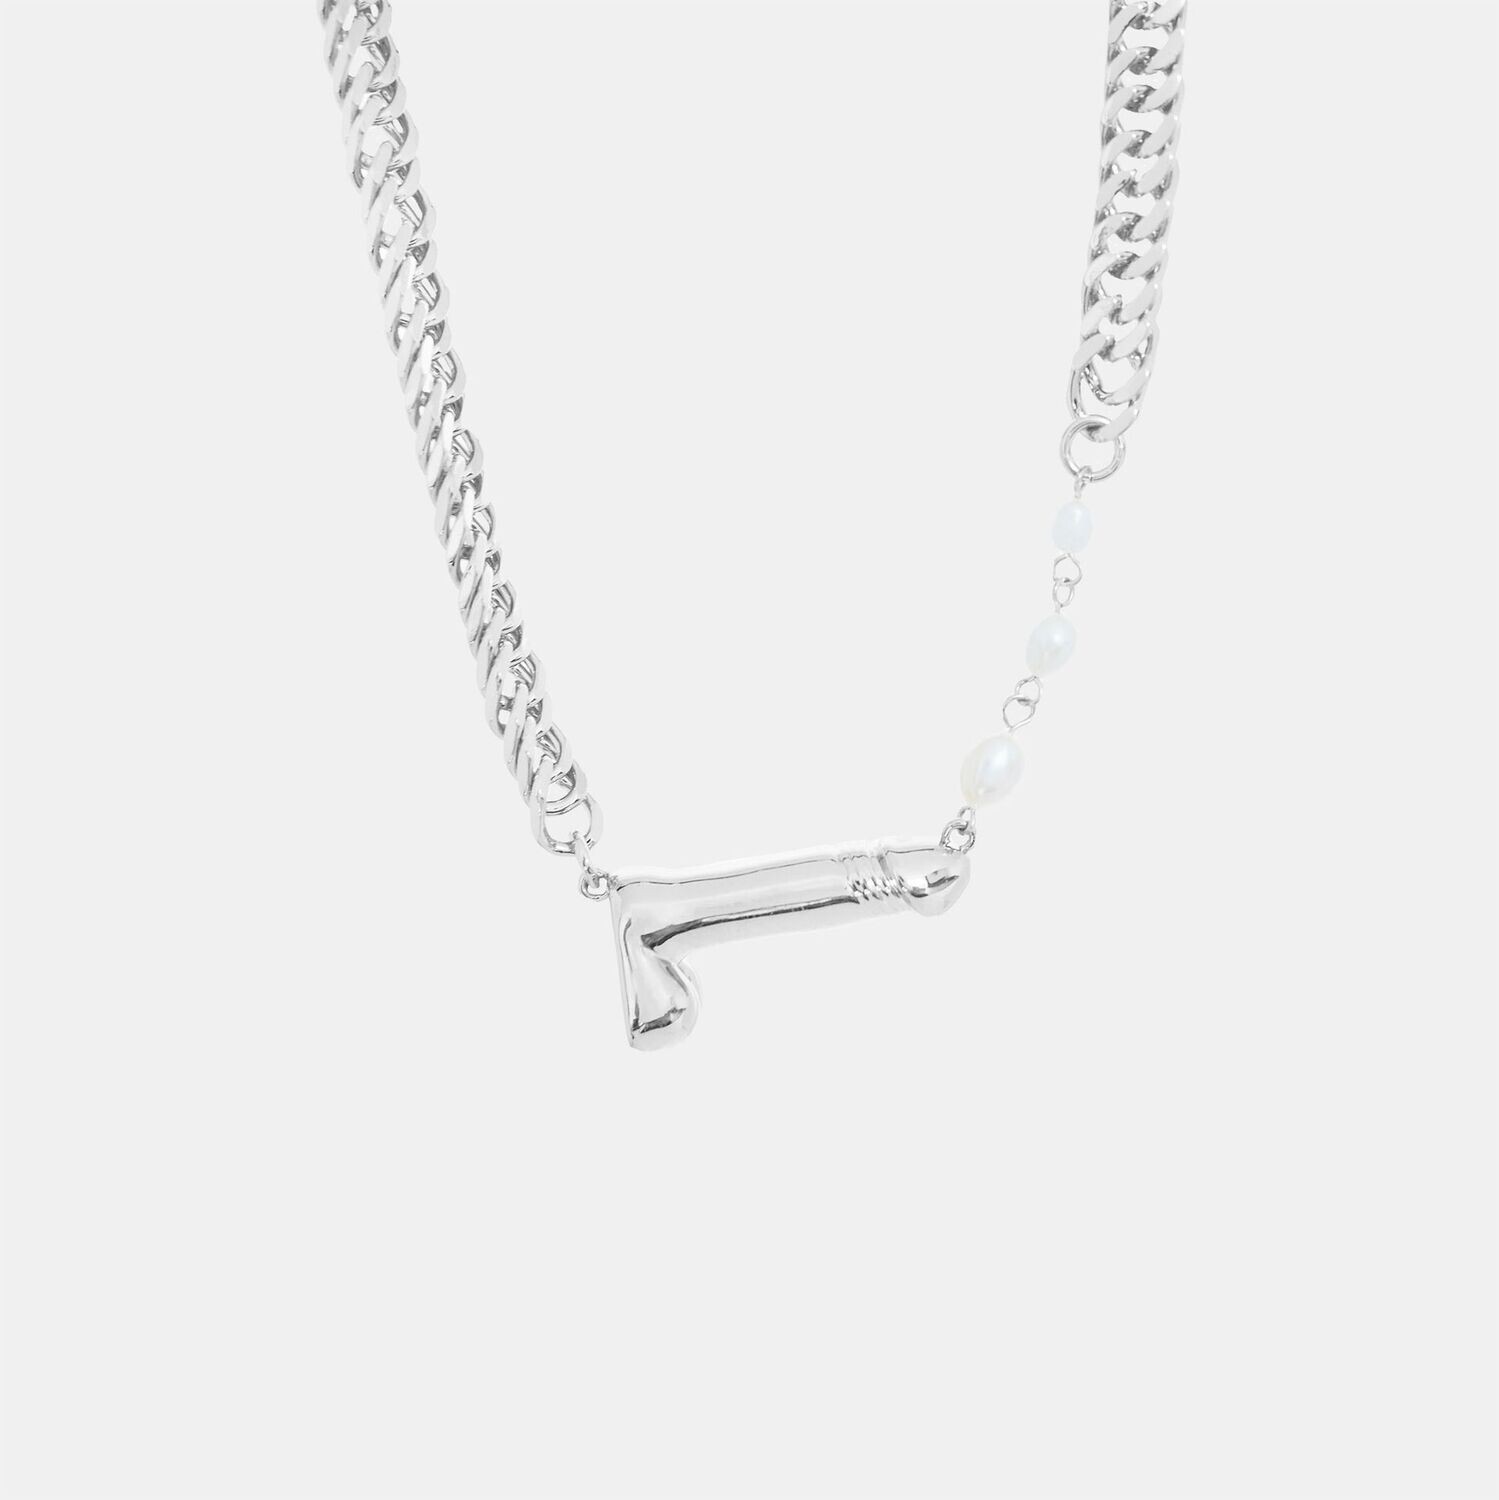 Hoemo World - Pearl Shooter Dick Chunky Pendant Necklace - Silver